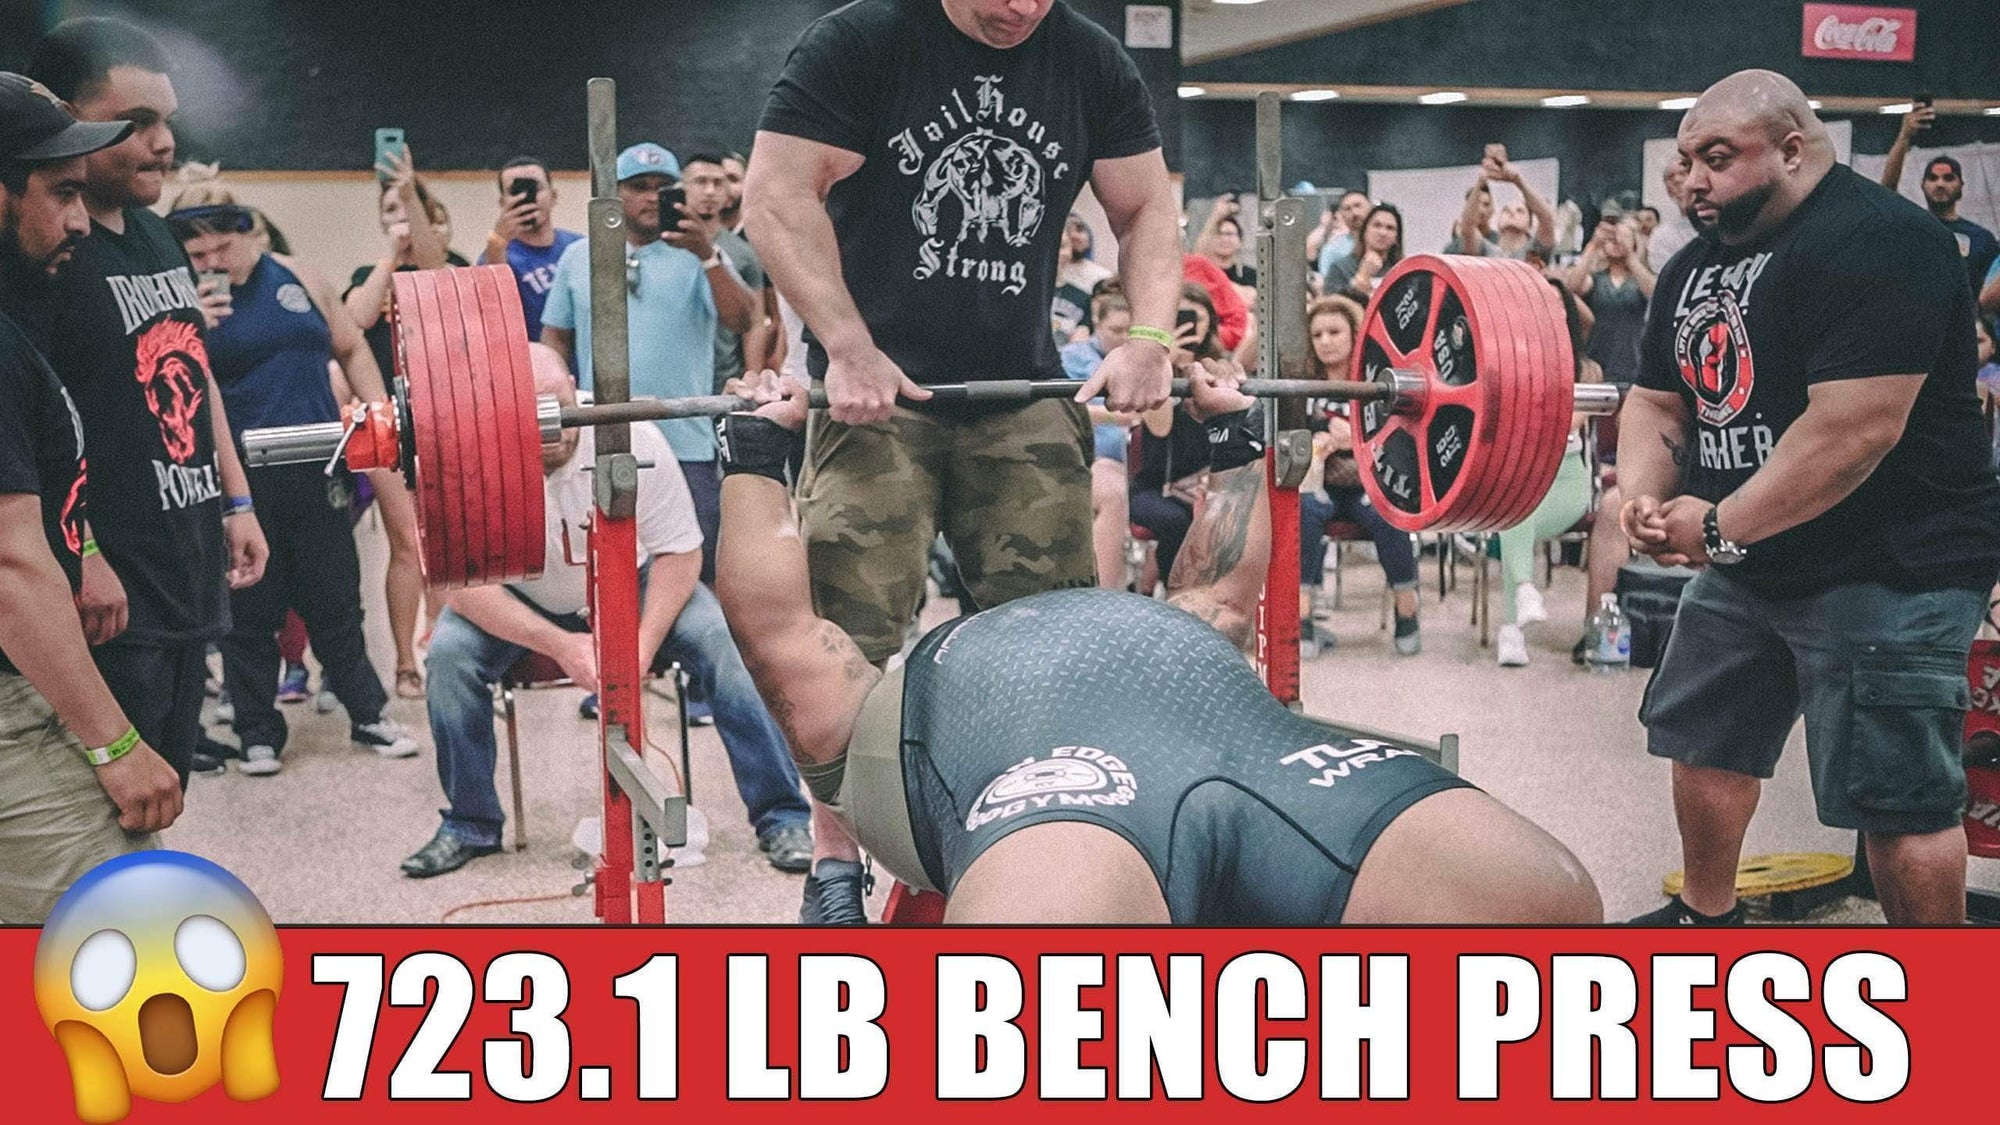 Julius Maddox 723.1 Lb Bench Press Is The New American Record!